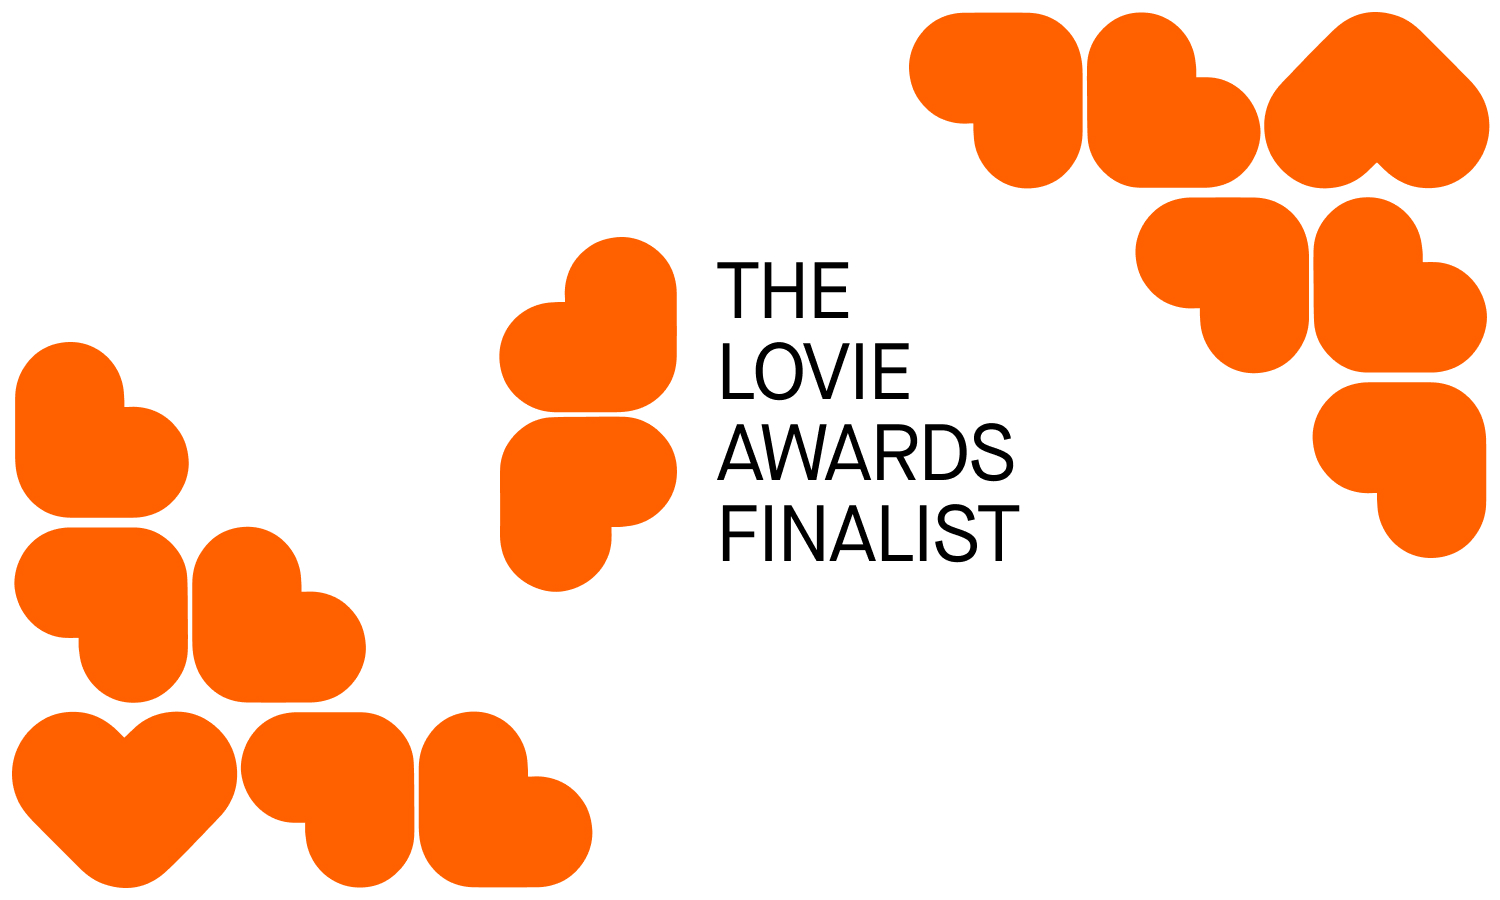 DEPT® is a Lovie Awards Finalist with a record breaking 35 projects on the shortlist